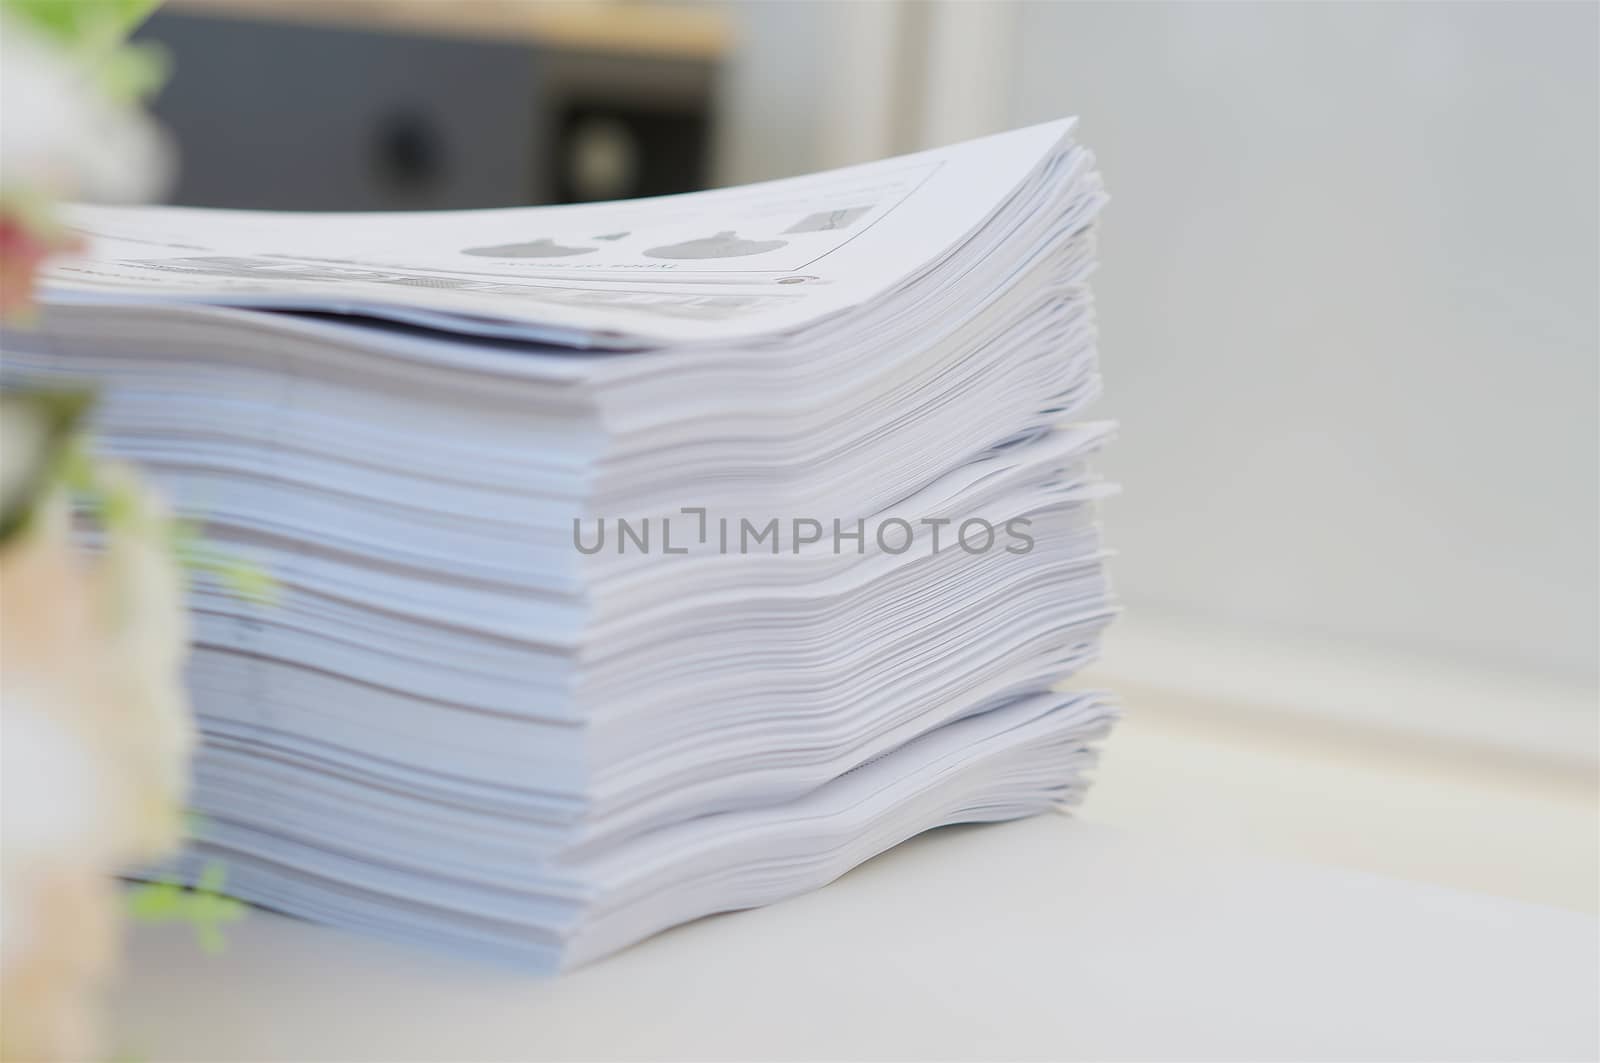 Paperwork at office environment by ninun